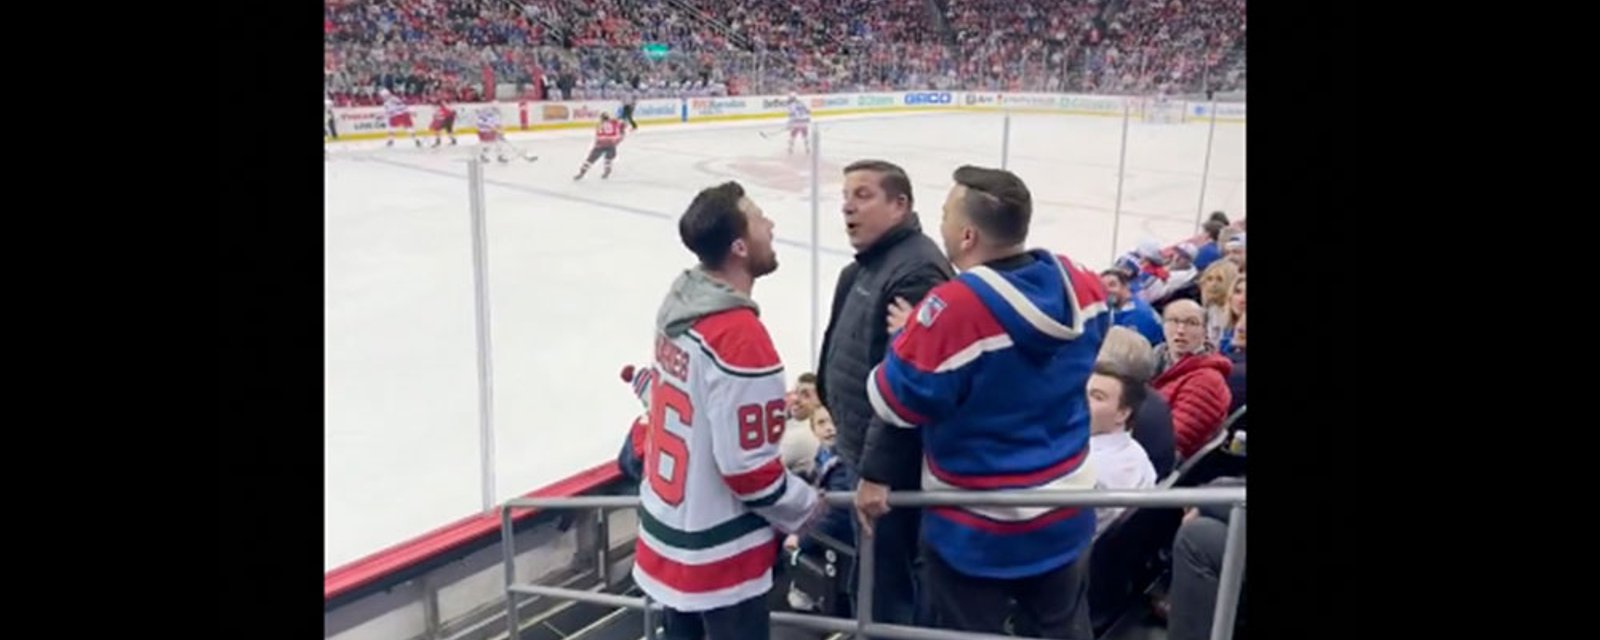 Devils and Rangers fans come to blows in the lower bowl at Prudential Center